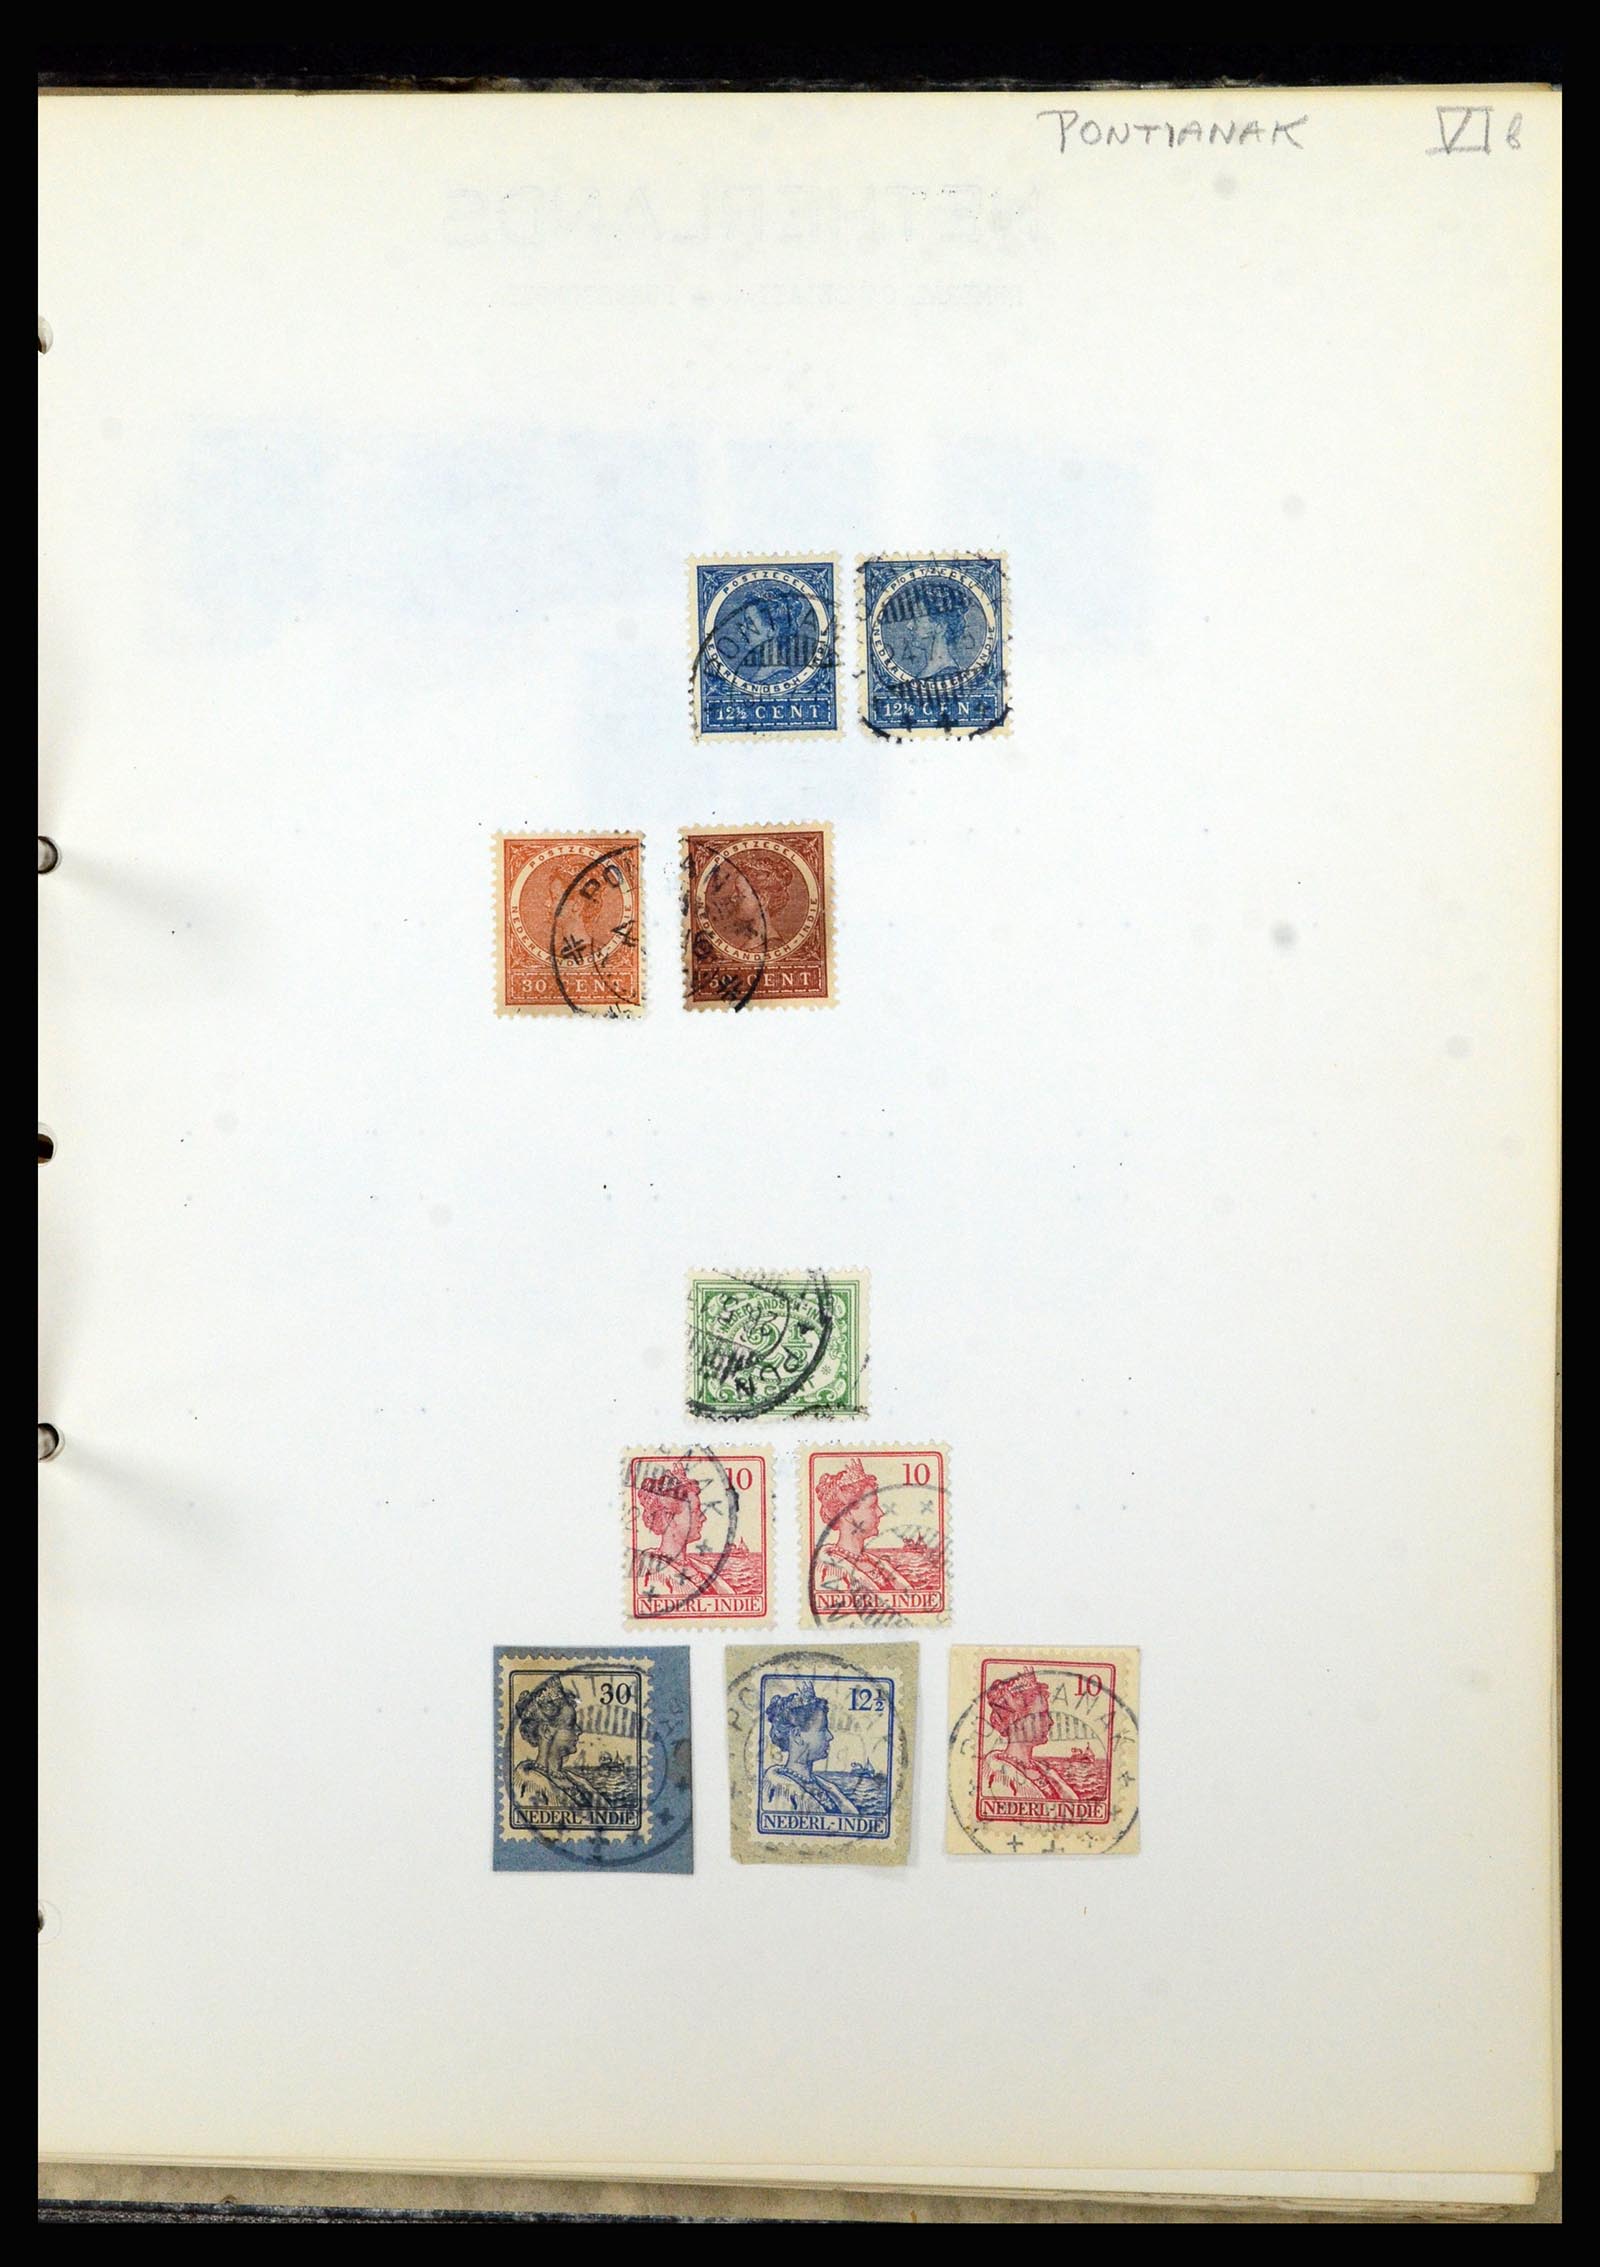 36841 097 - Stamp collection 36841 Dutch east Indies short bar cancels.